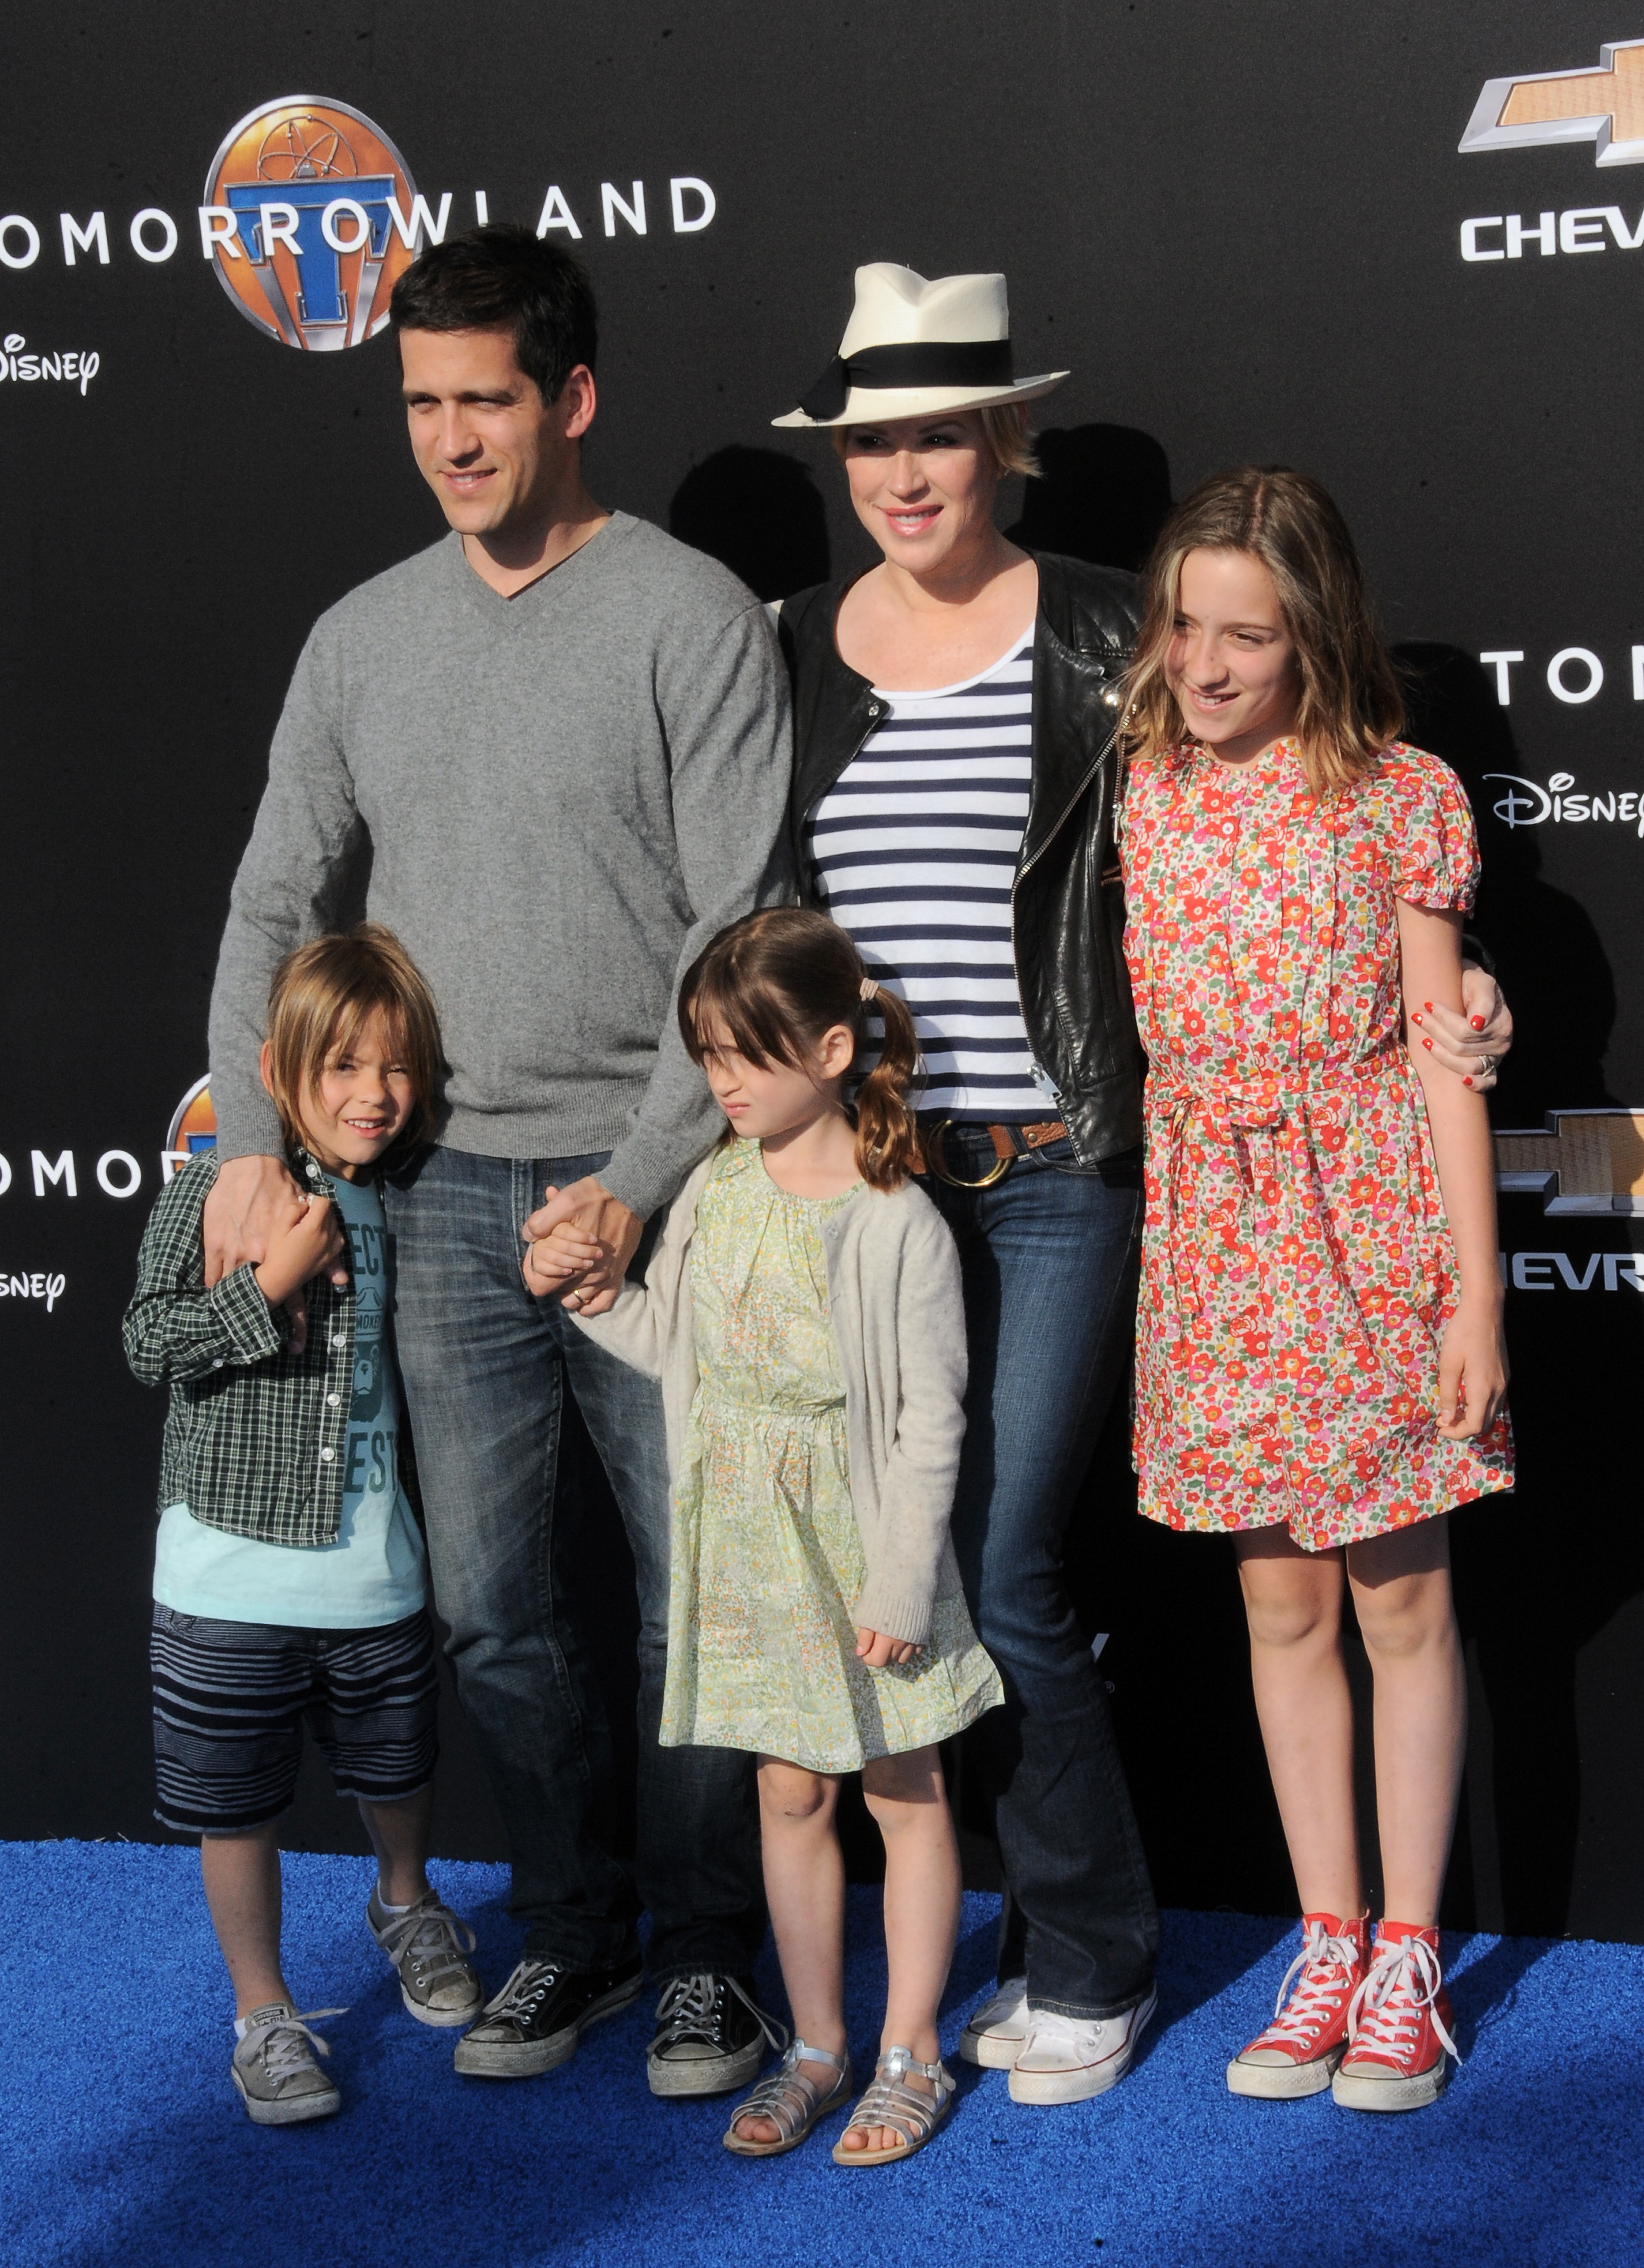 Panio Gianopoulos and Molly Ringwald with their children at the "Tomorrowland" premiere in Anaheim, California on May 9, 2015 | Source: Getty Images